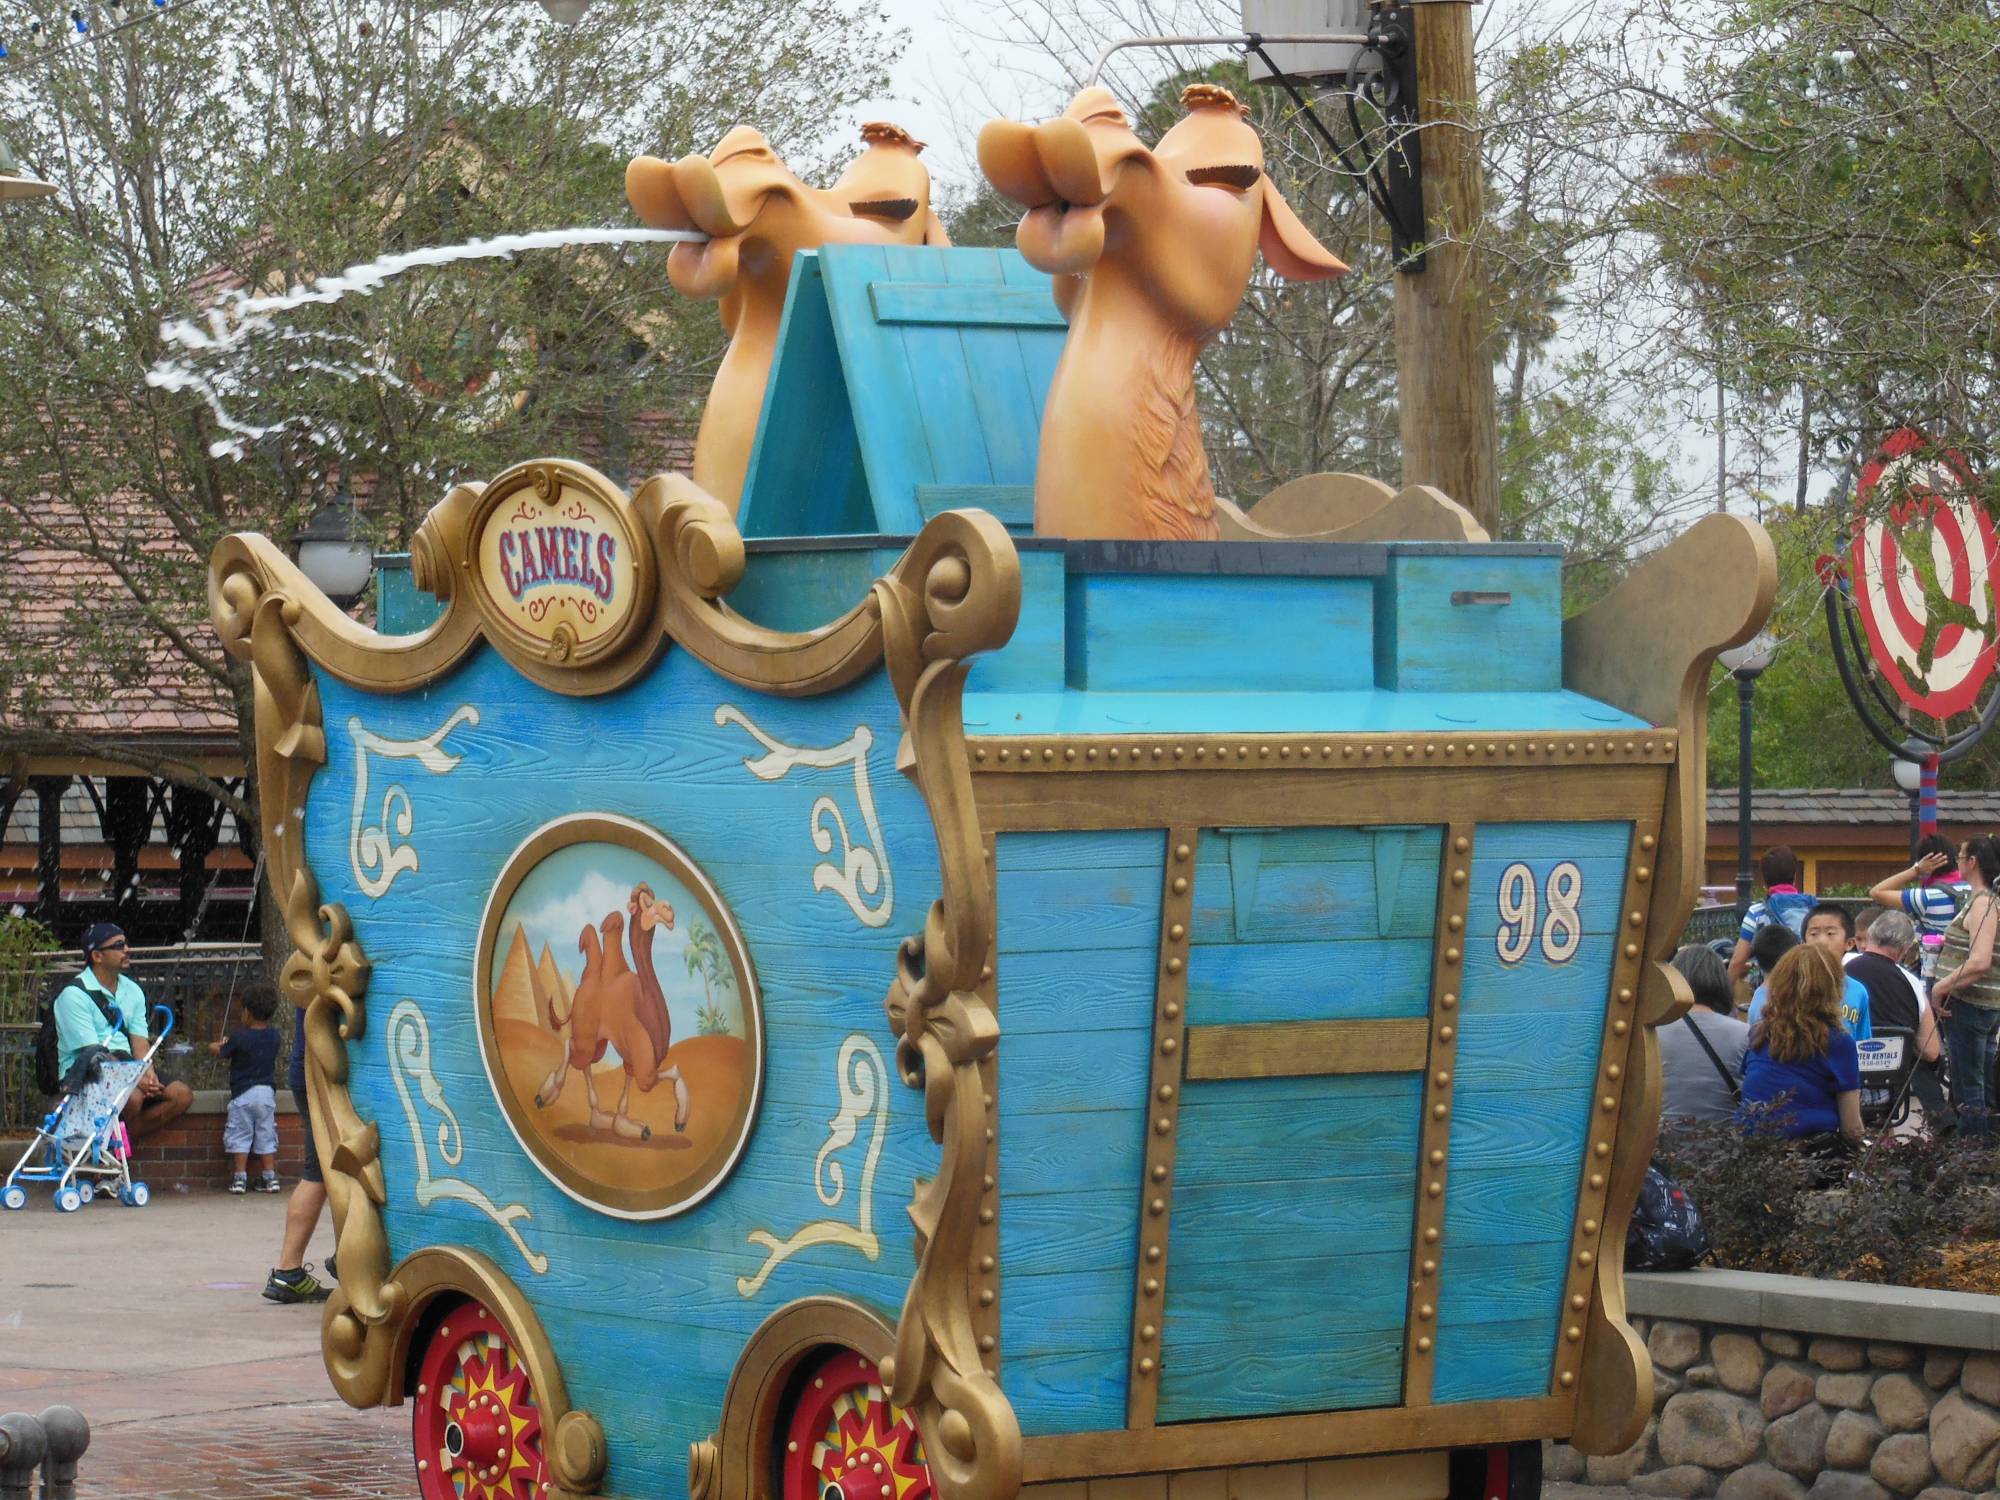 Explore all there is to offer in Fantasyland at the Magic Kingdom |PassPorter.com